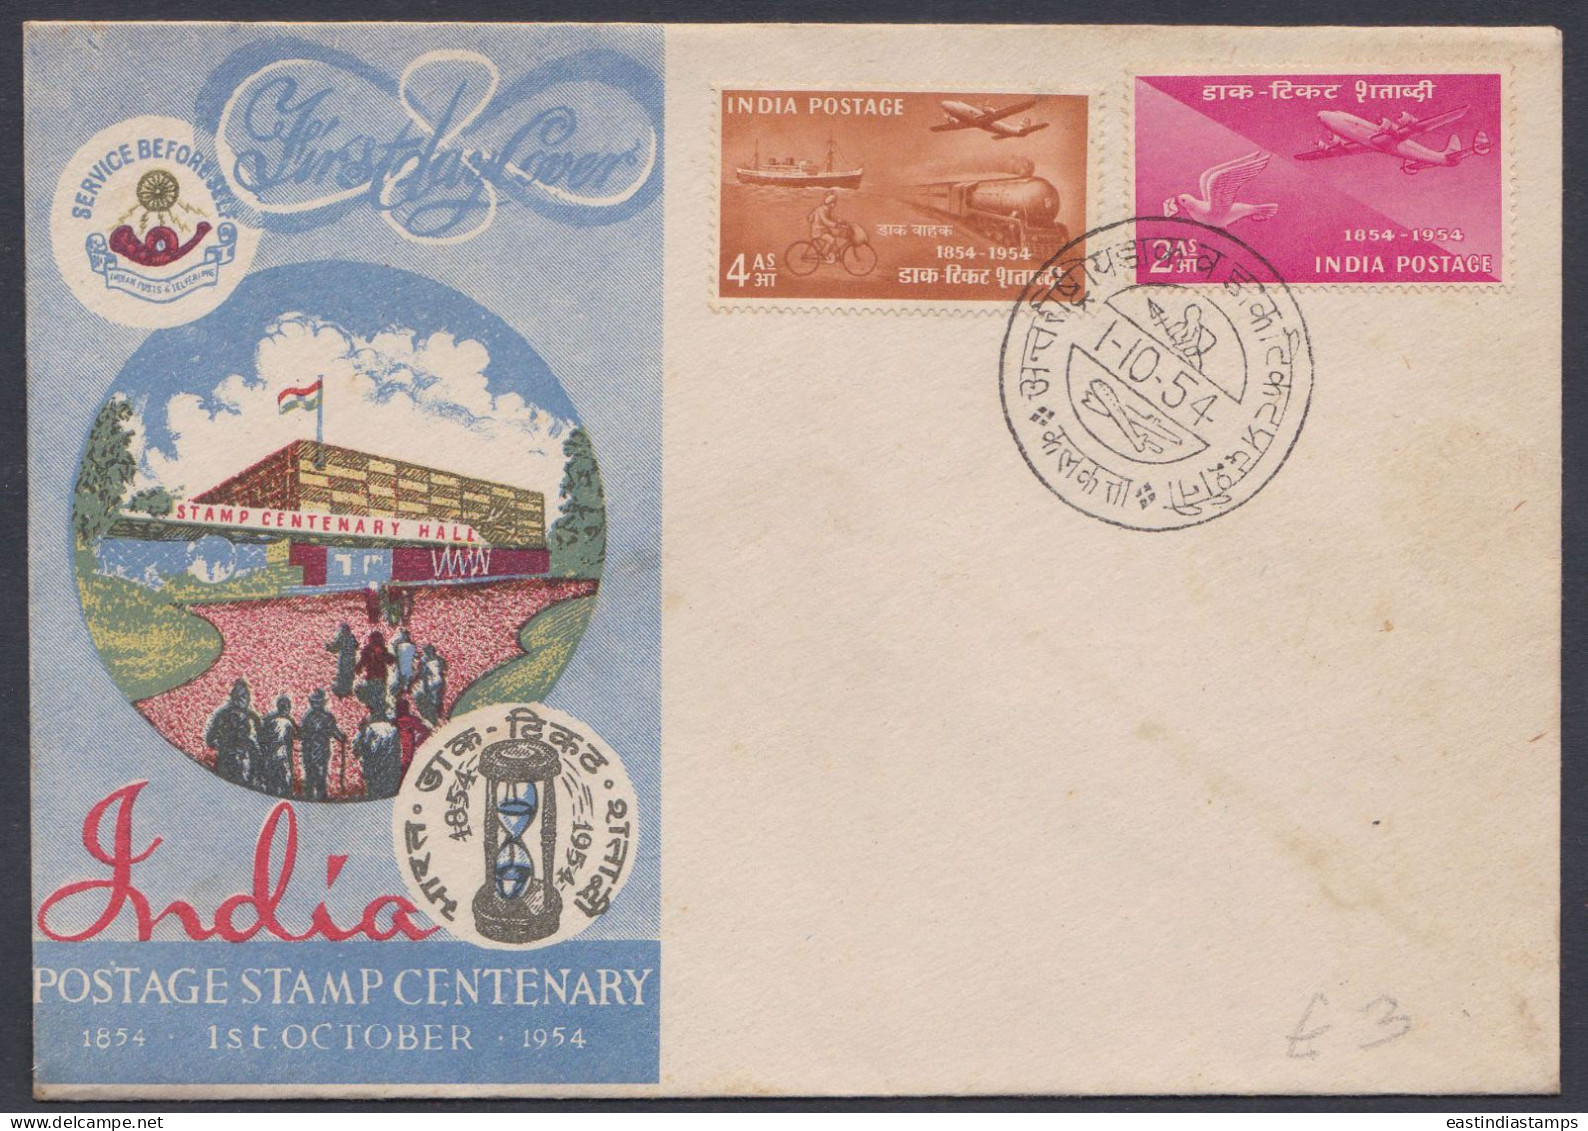 Inde India 1954 FDC Postage Stamp, Aircraft, Aeroplane, Airmail, Biplane, Train, Ship, Seamail, Bicycle, First Day Cover - Covers & Documents